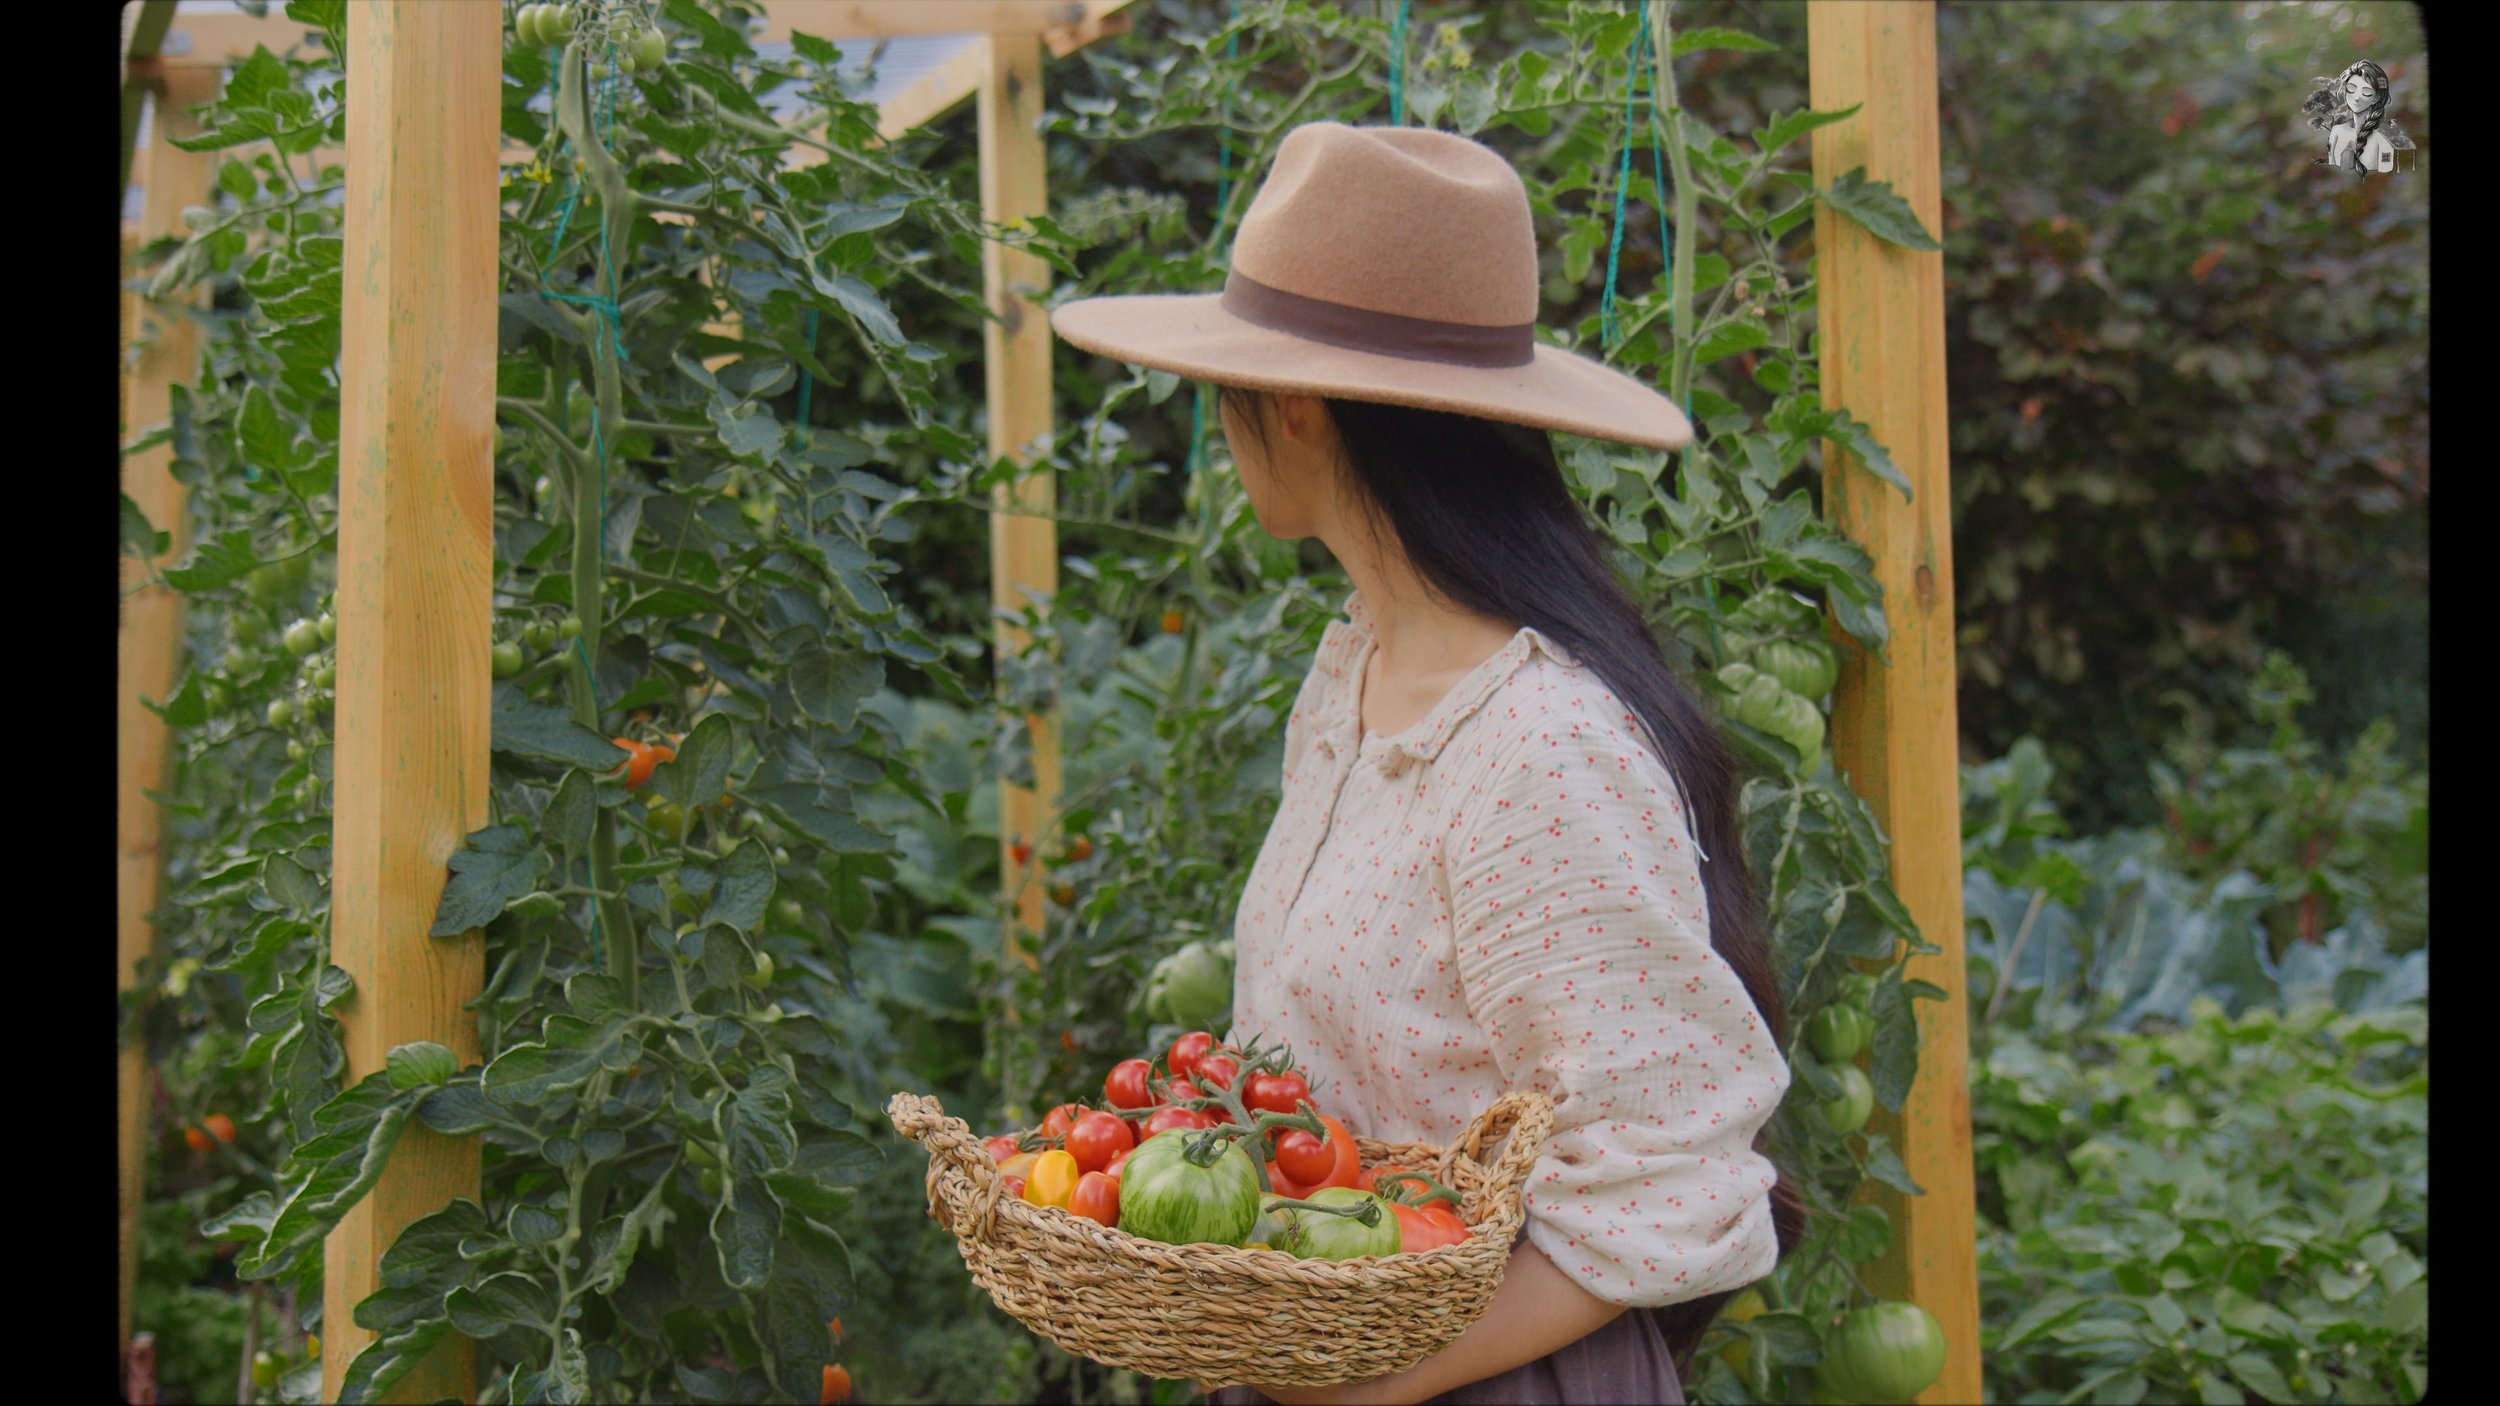 Everything About Growing Tomatoes - Her86m2 _1.241.1.jpg